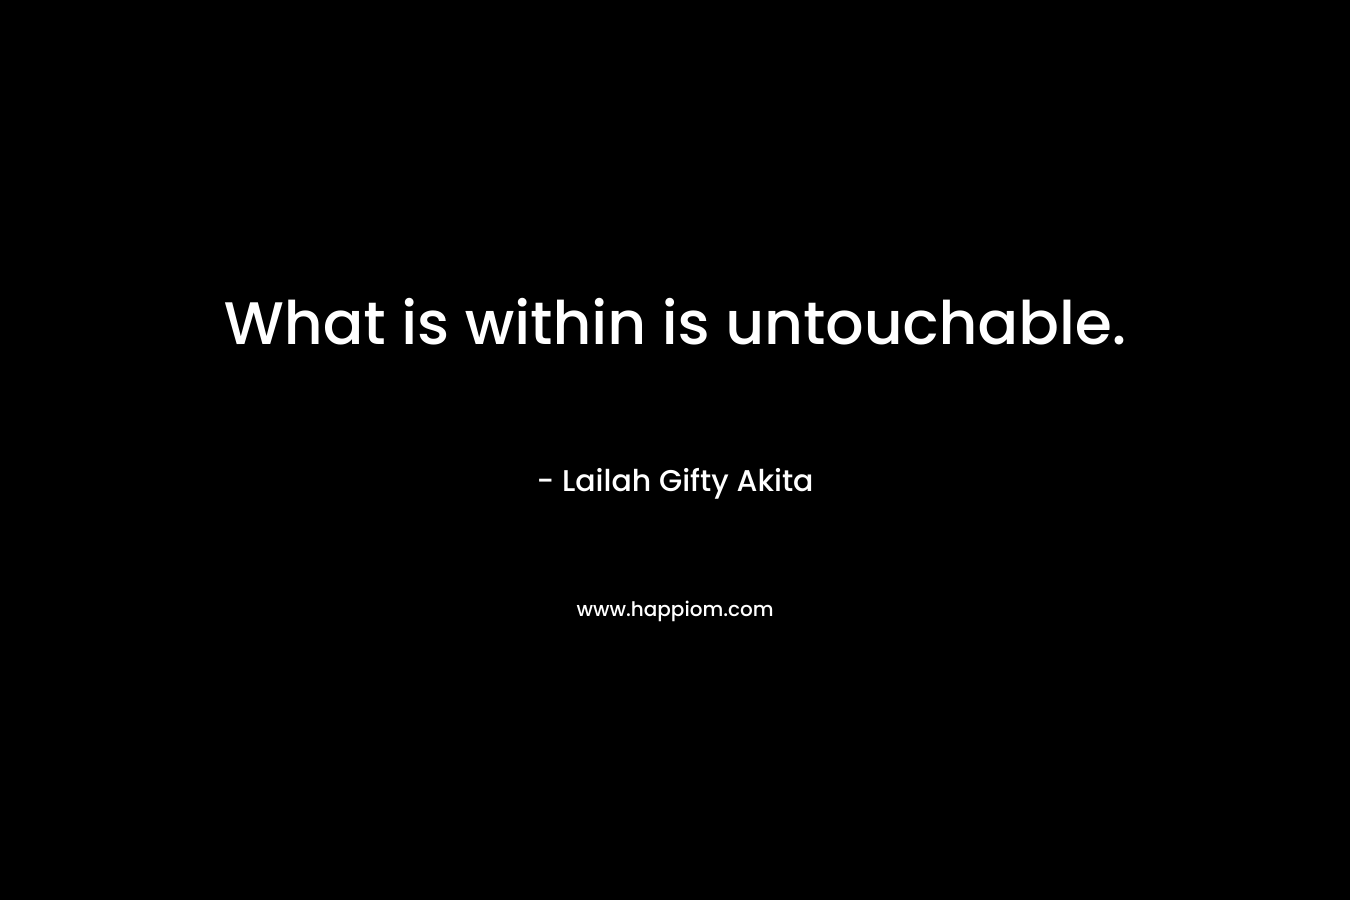 What is within is untouchable.